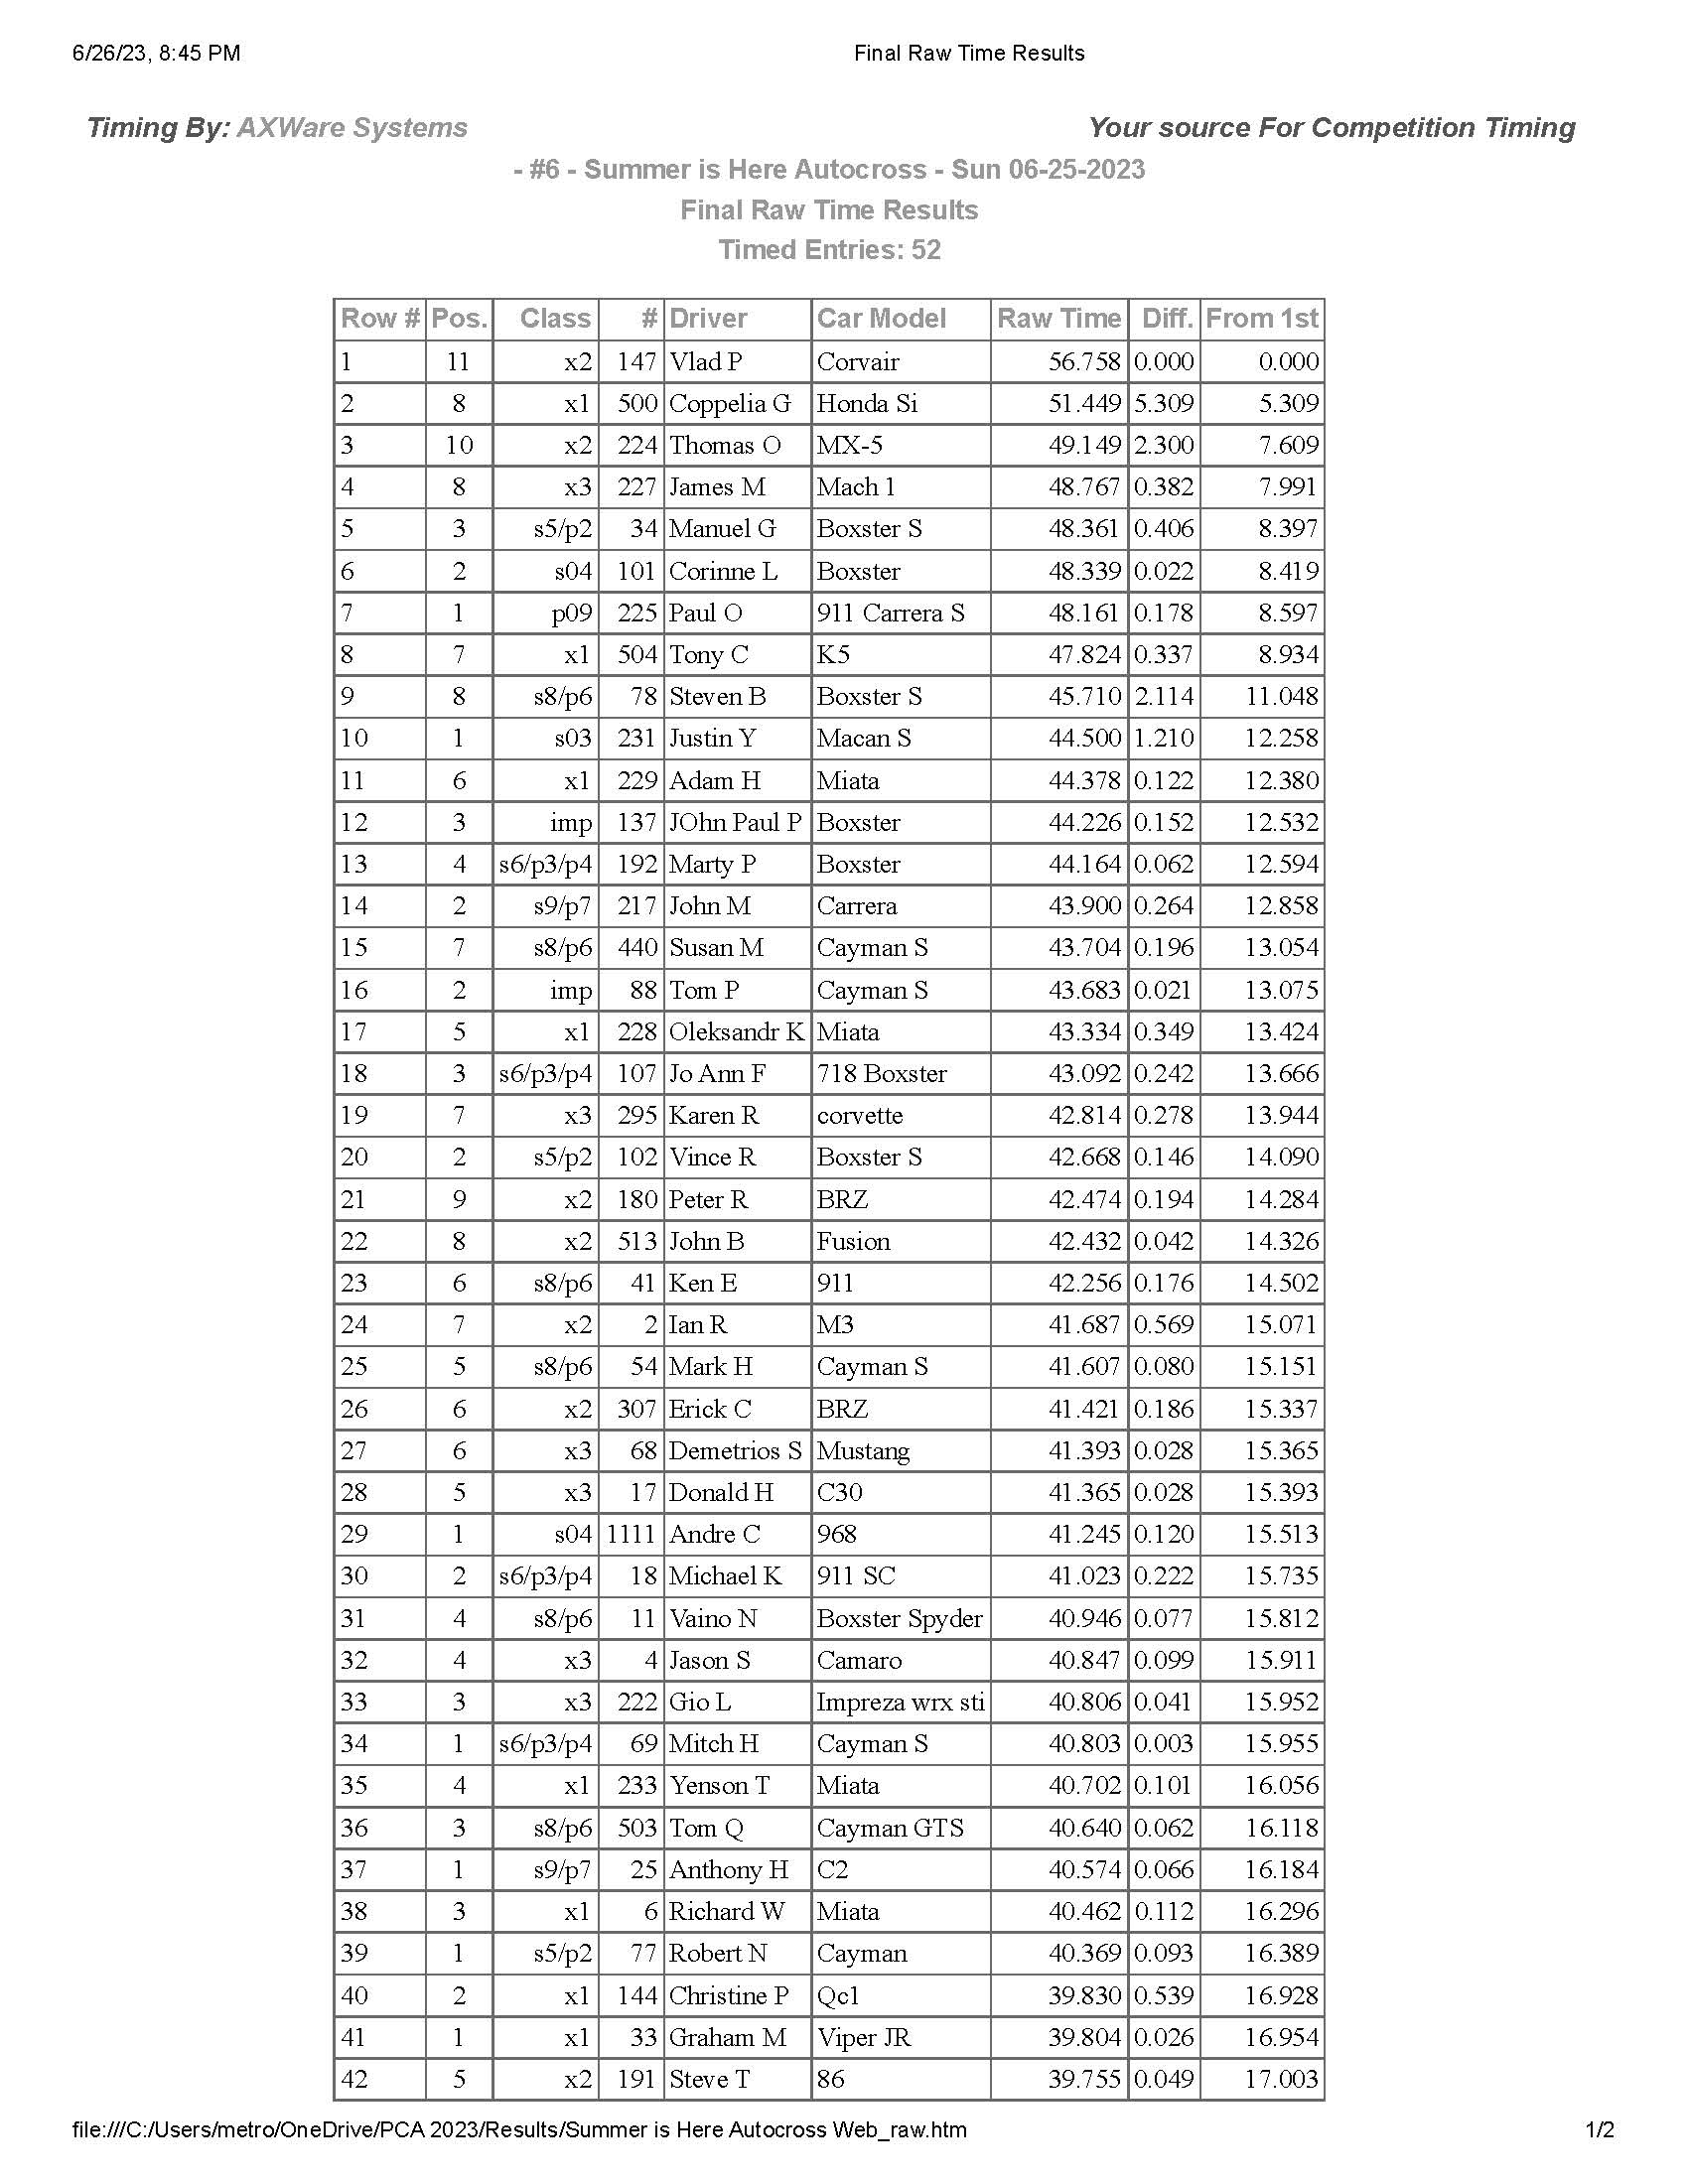 Summer is Here Autocross Final Raw Time Results Page 1